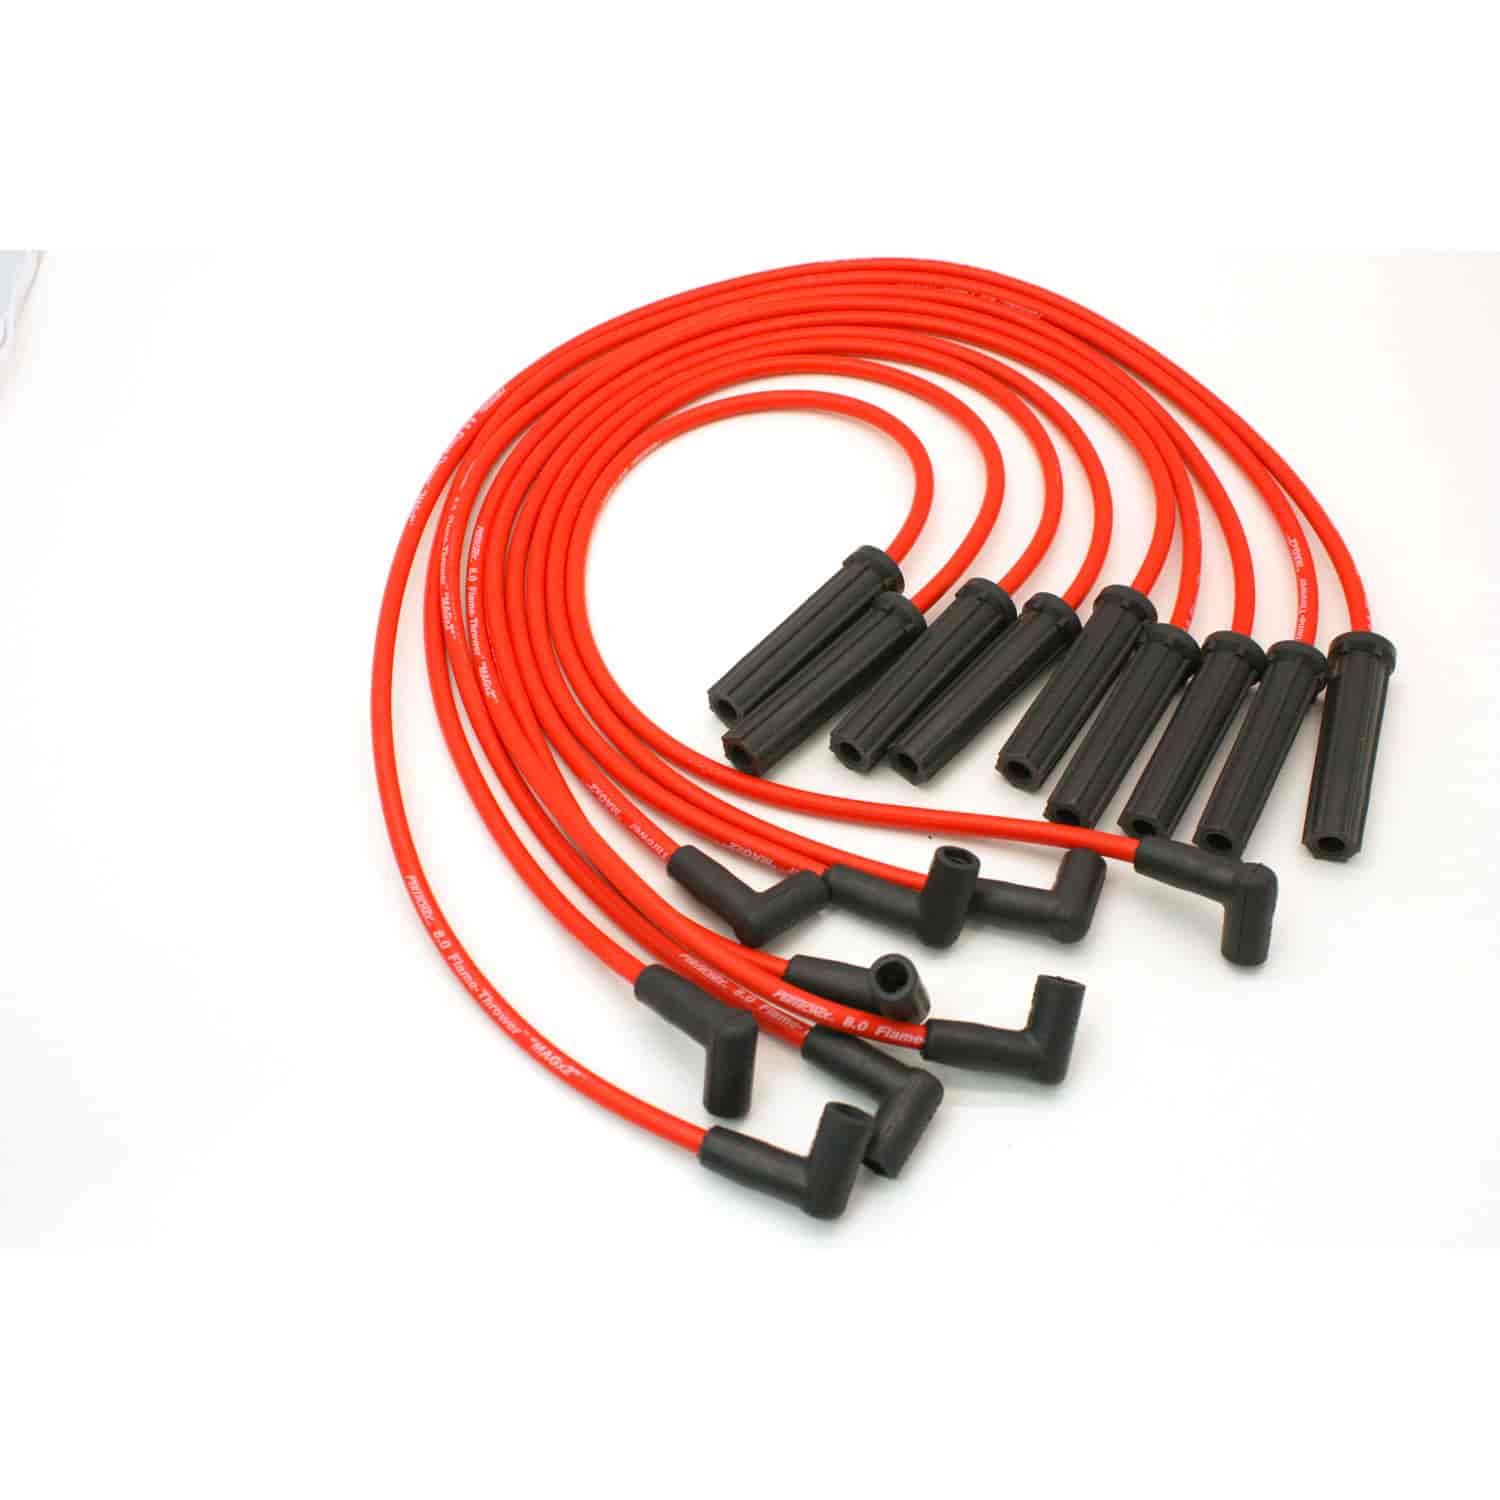 Flame-Thrower 8mm MAGx2 Spark Plug Wires 1974-76 Chevy Impala & Caprice 454